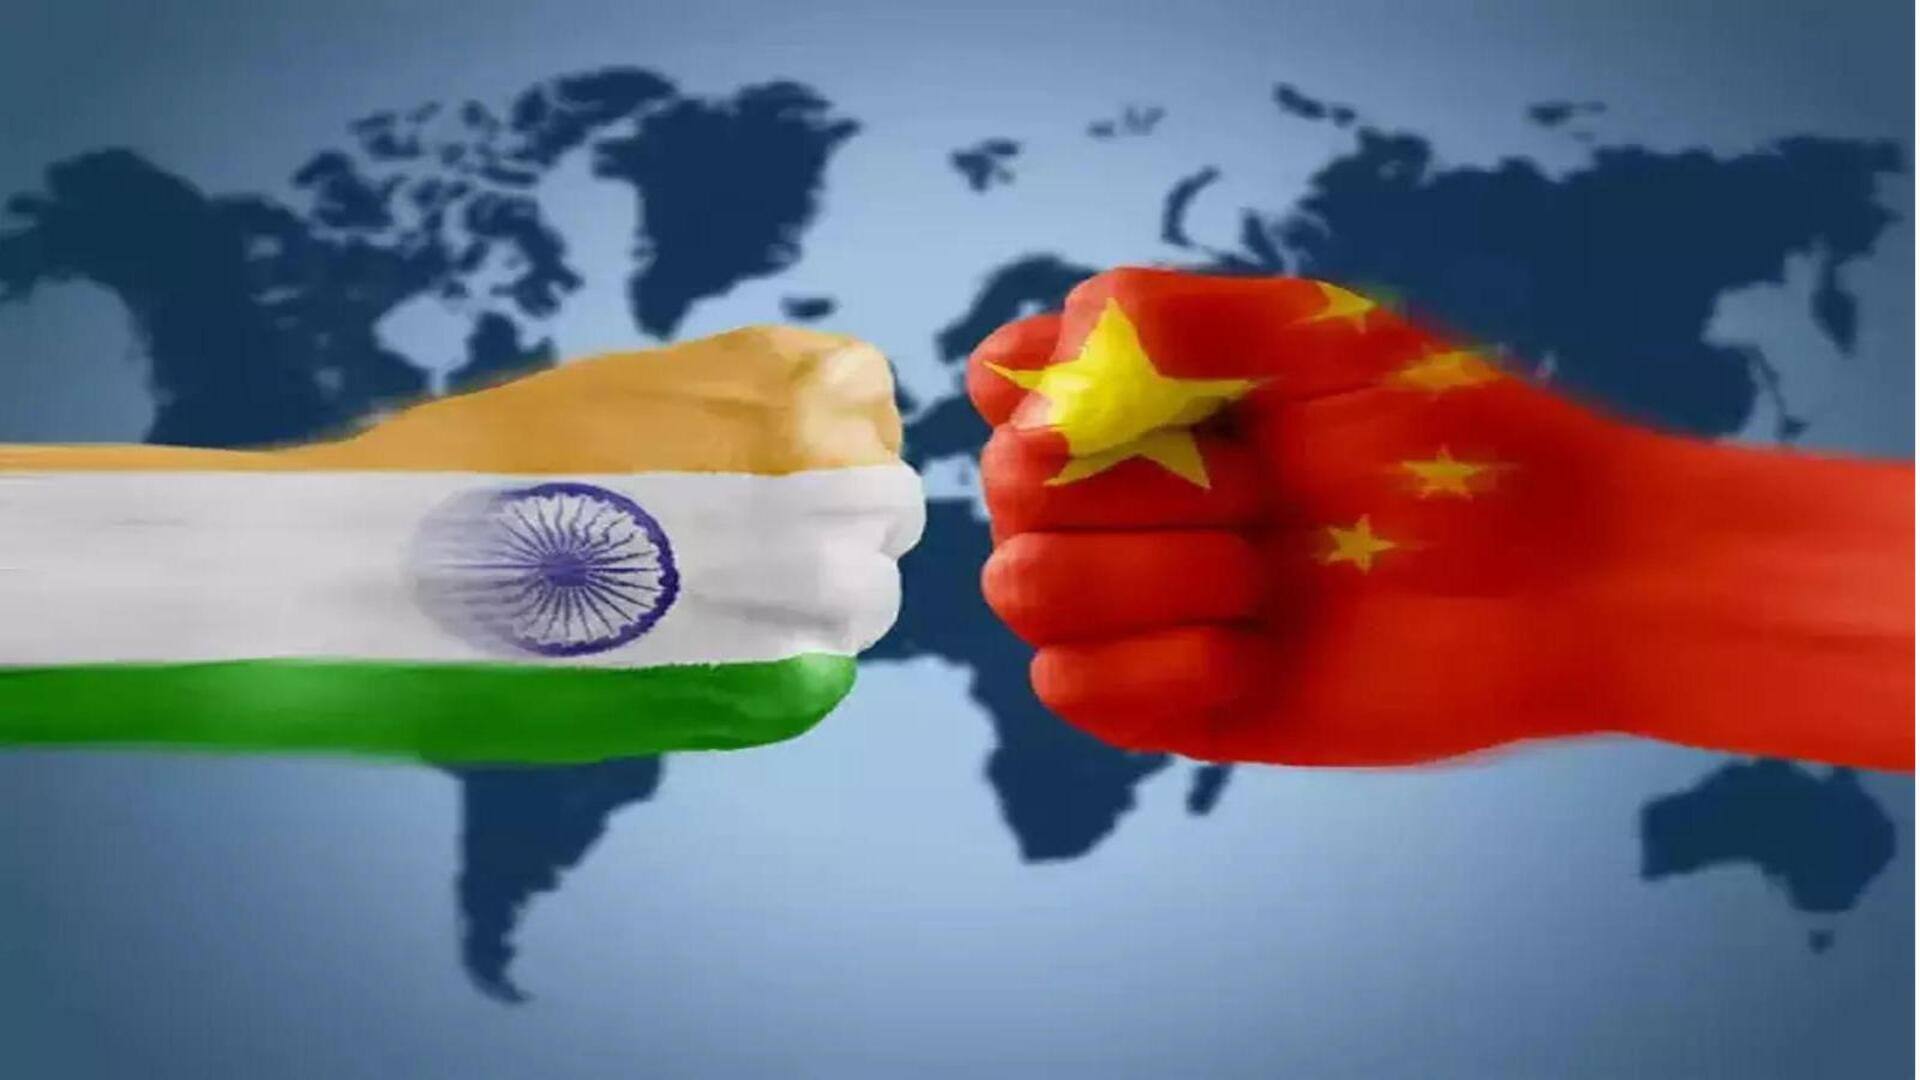 Study shows wealth and pension funds favor India over China